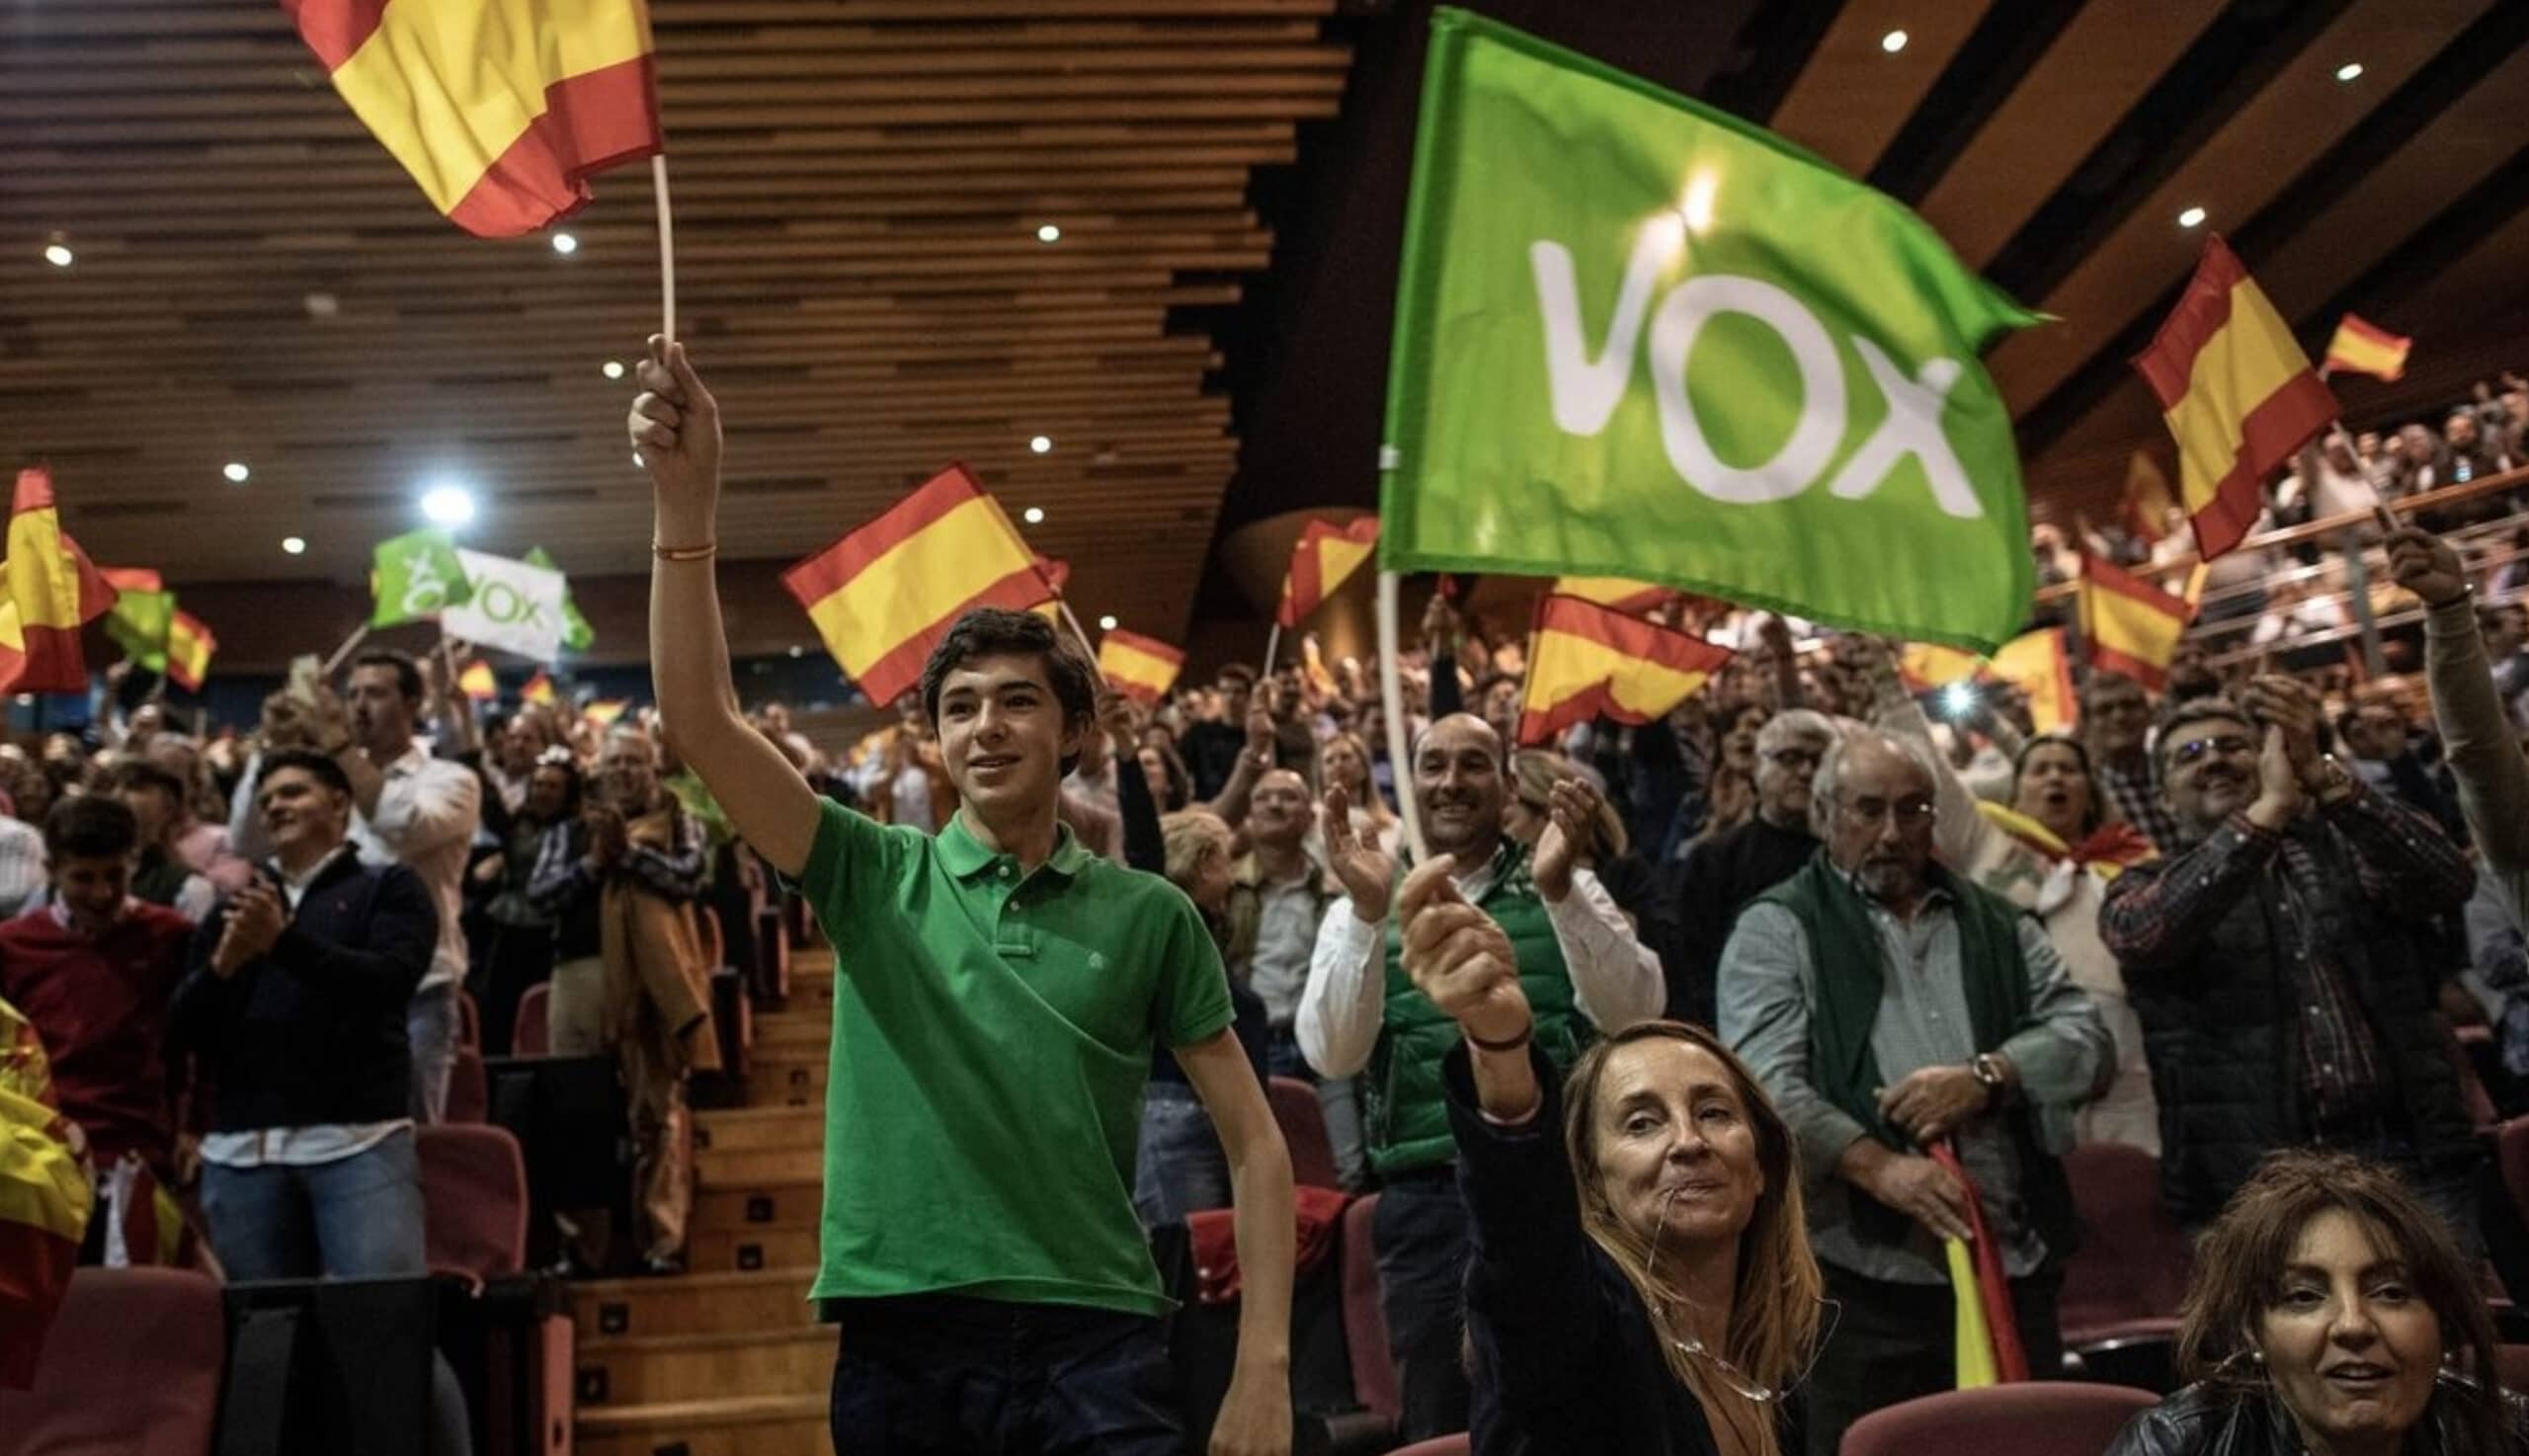 Spanish elections - vox party